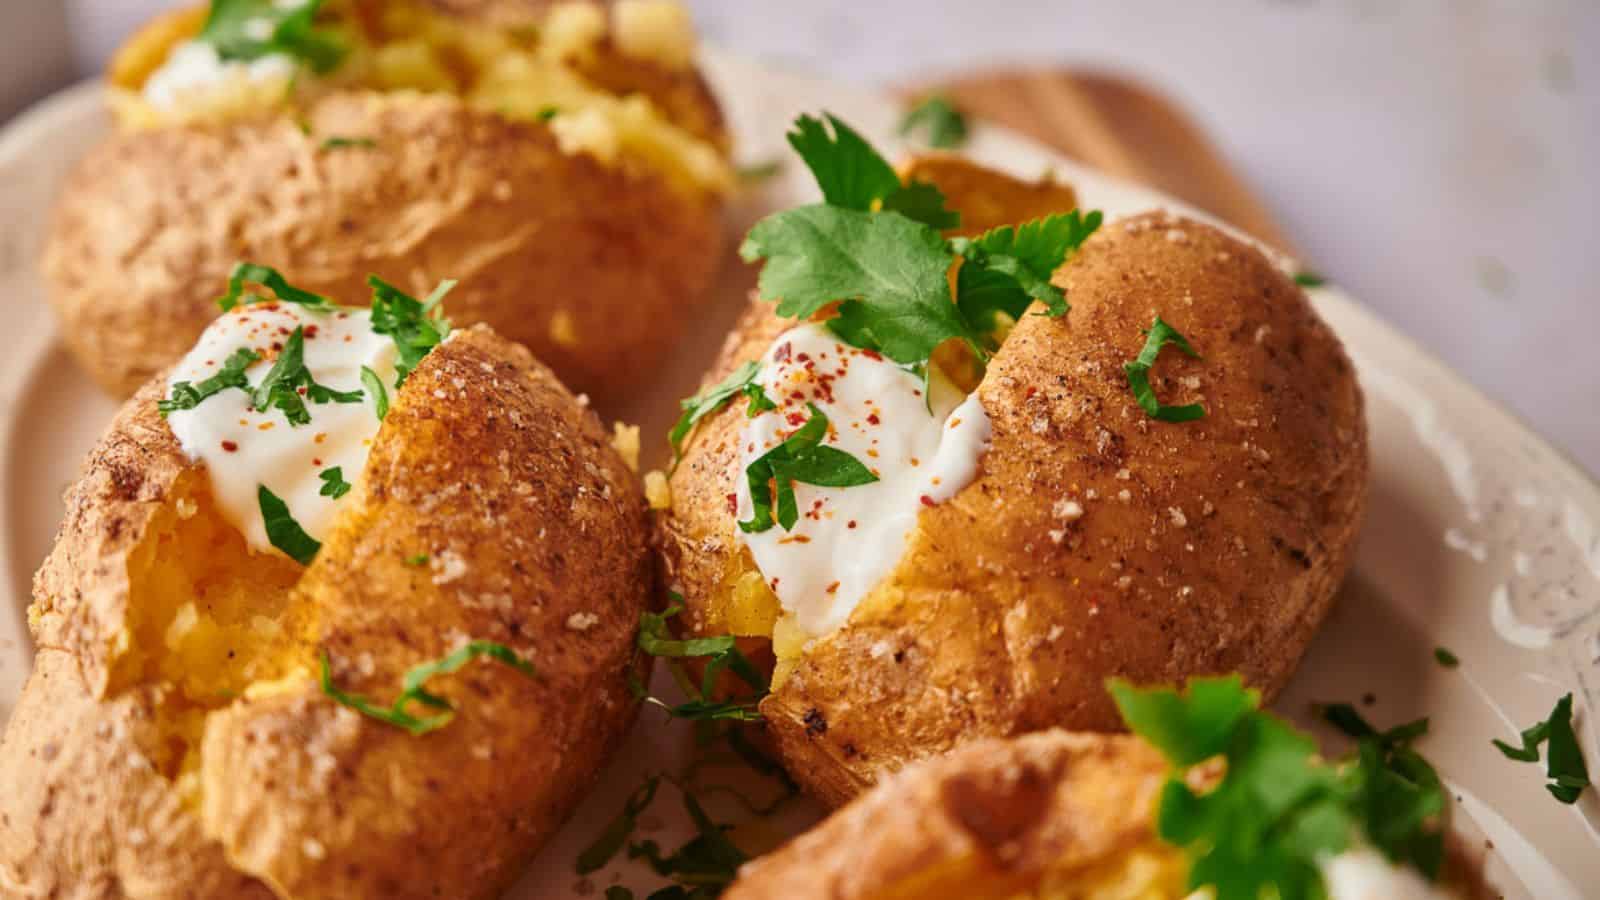 <p>Sometimes, simplicity is key, and Baked Potato is a prime example. Easy to prepare and satisfying, it’s a timeless classic.<br><strong>Get the Recipe: </strong><a href="https://www.splashoftaste.com/baked-potato/?utm_source=msn&utm_medium=page&utm_campaign=msn">Baked Potato</a></p>